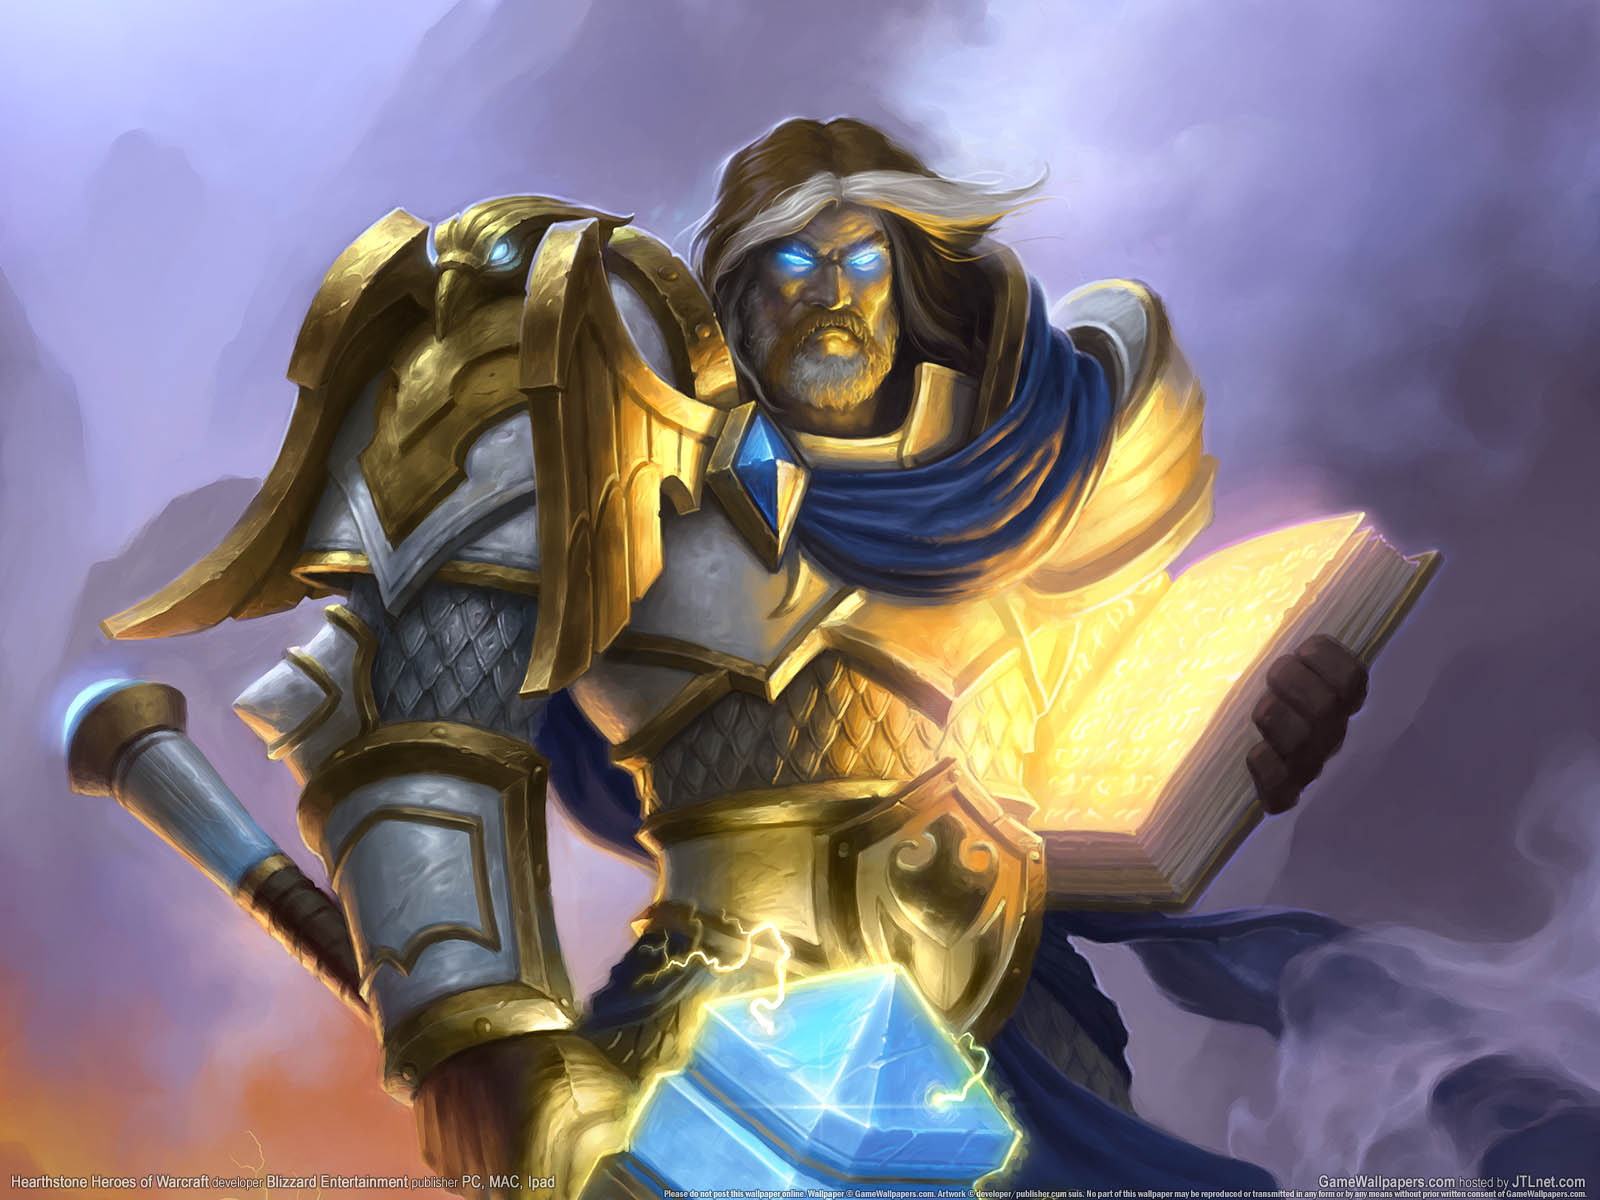 Hearthstone%253A Heroes of Warcraft wallpaper 01 1600x1200